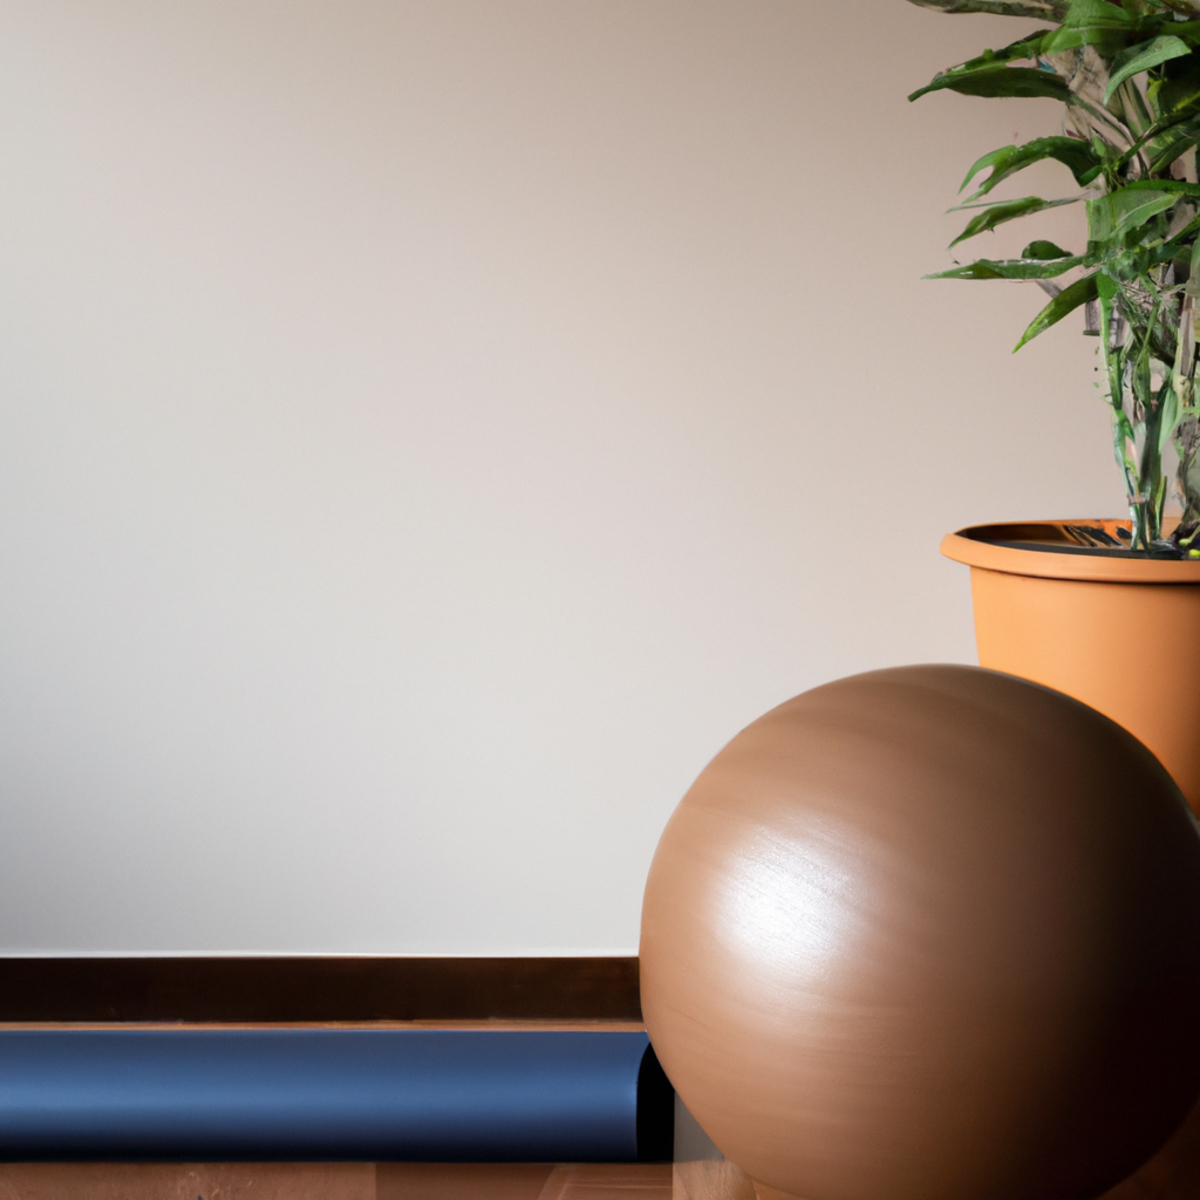 The photo captures a serene scene of a yoga mat and a Pilates ball placed side by side on a wooden floor. The soft lighting highlights the texture of the mat and the smooth surface of the ball. A small plant in a terracotta pot sits in the background, adding a touch of nature to the composition. The attention to detail in the arrangement of the objects conveys a sense of balance and harmony, reflecting the benefits of combining yoga and Pilates for a holistic approach to wellness.